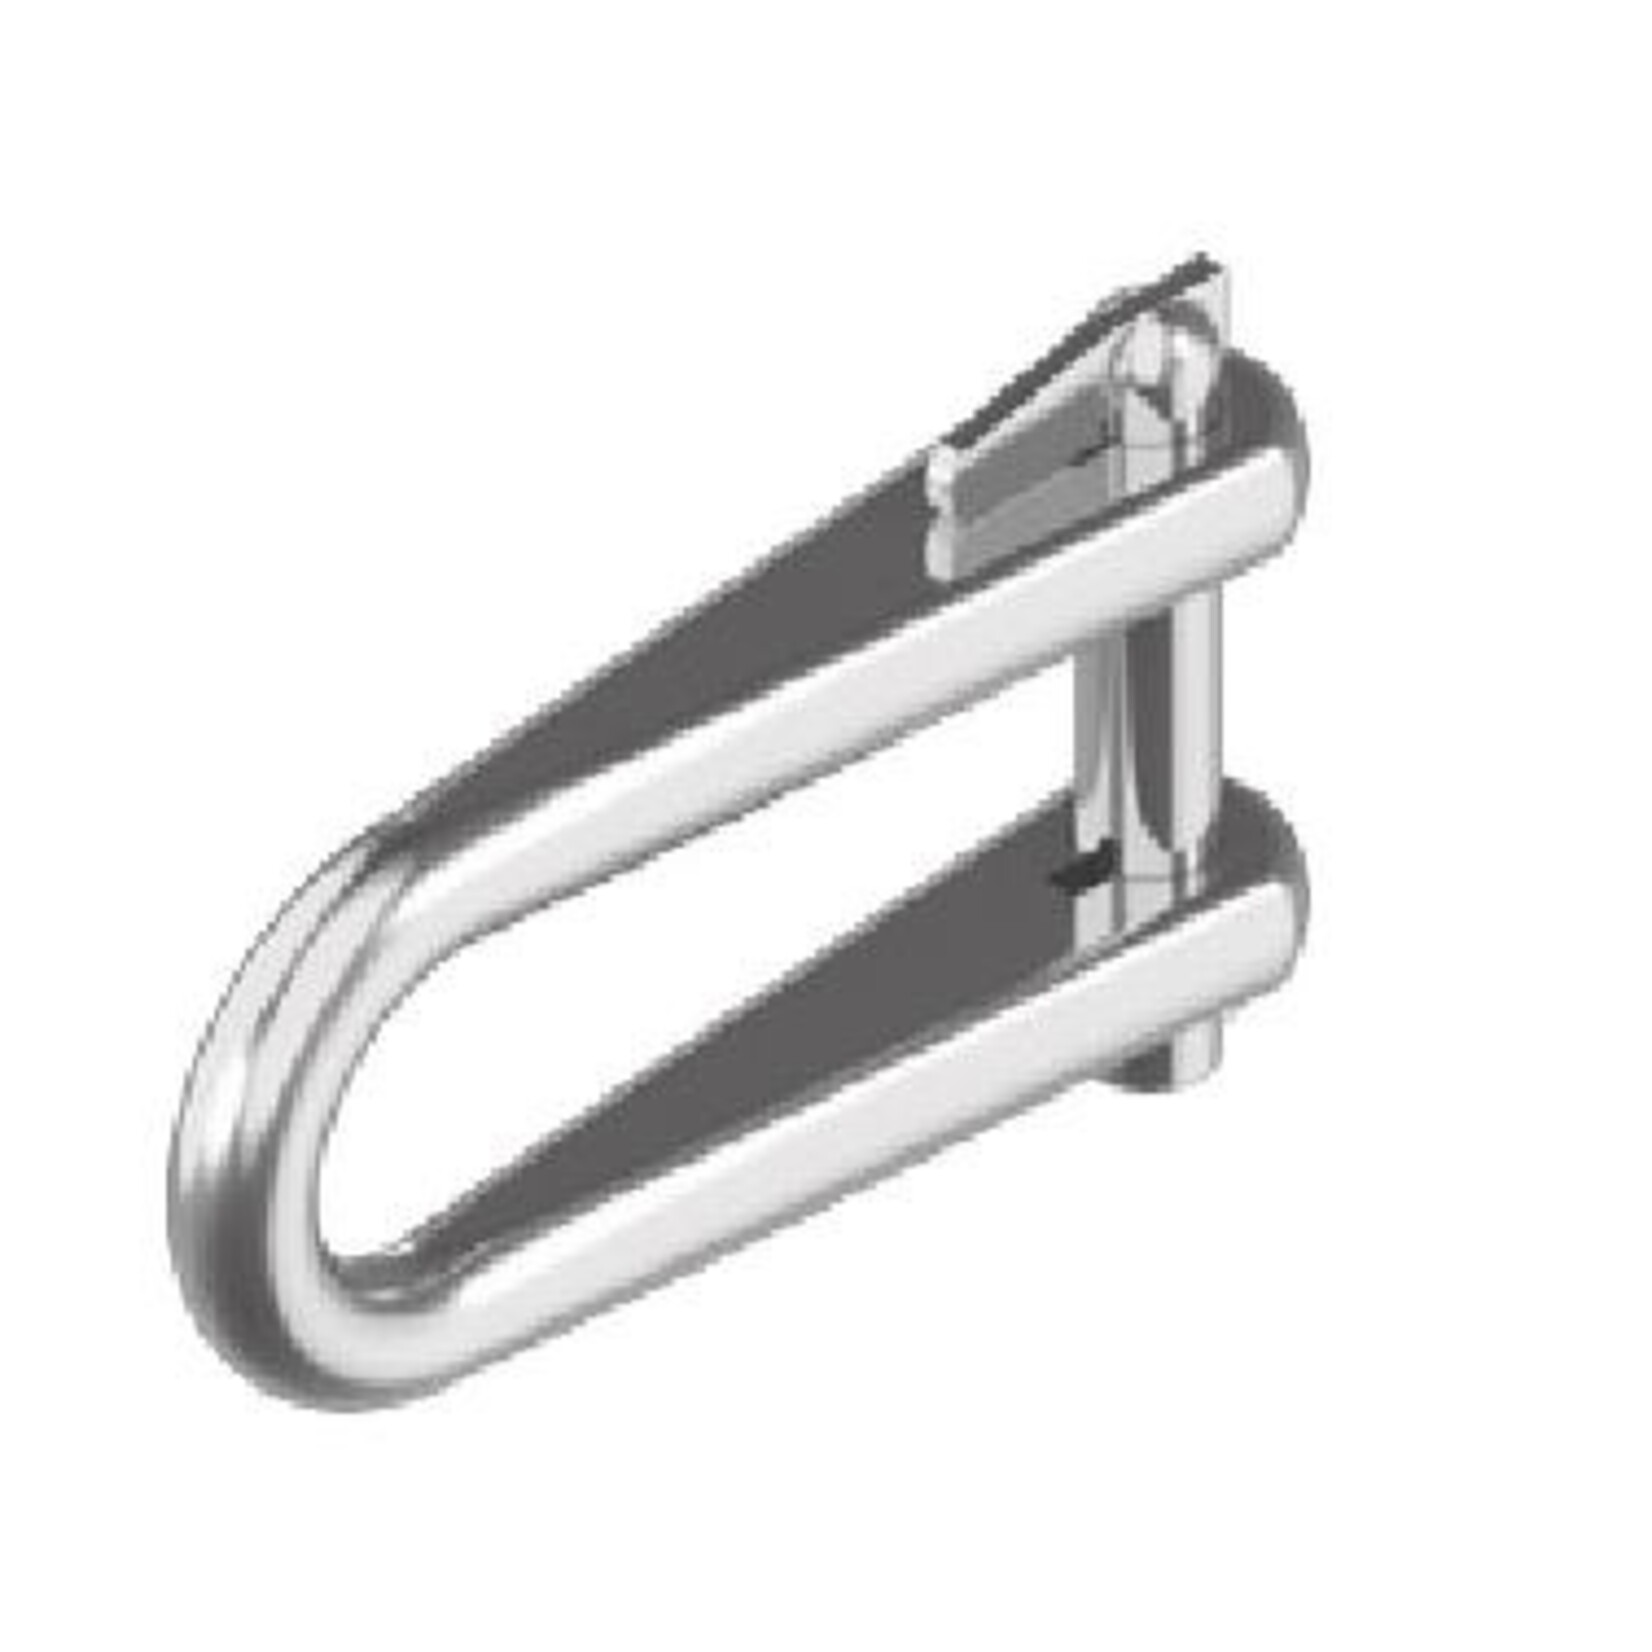 Key pin shackle stainless 5mm